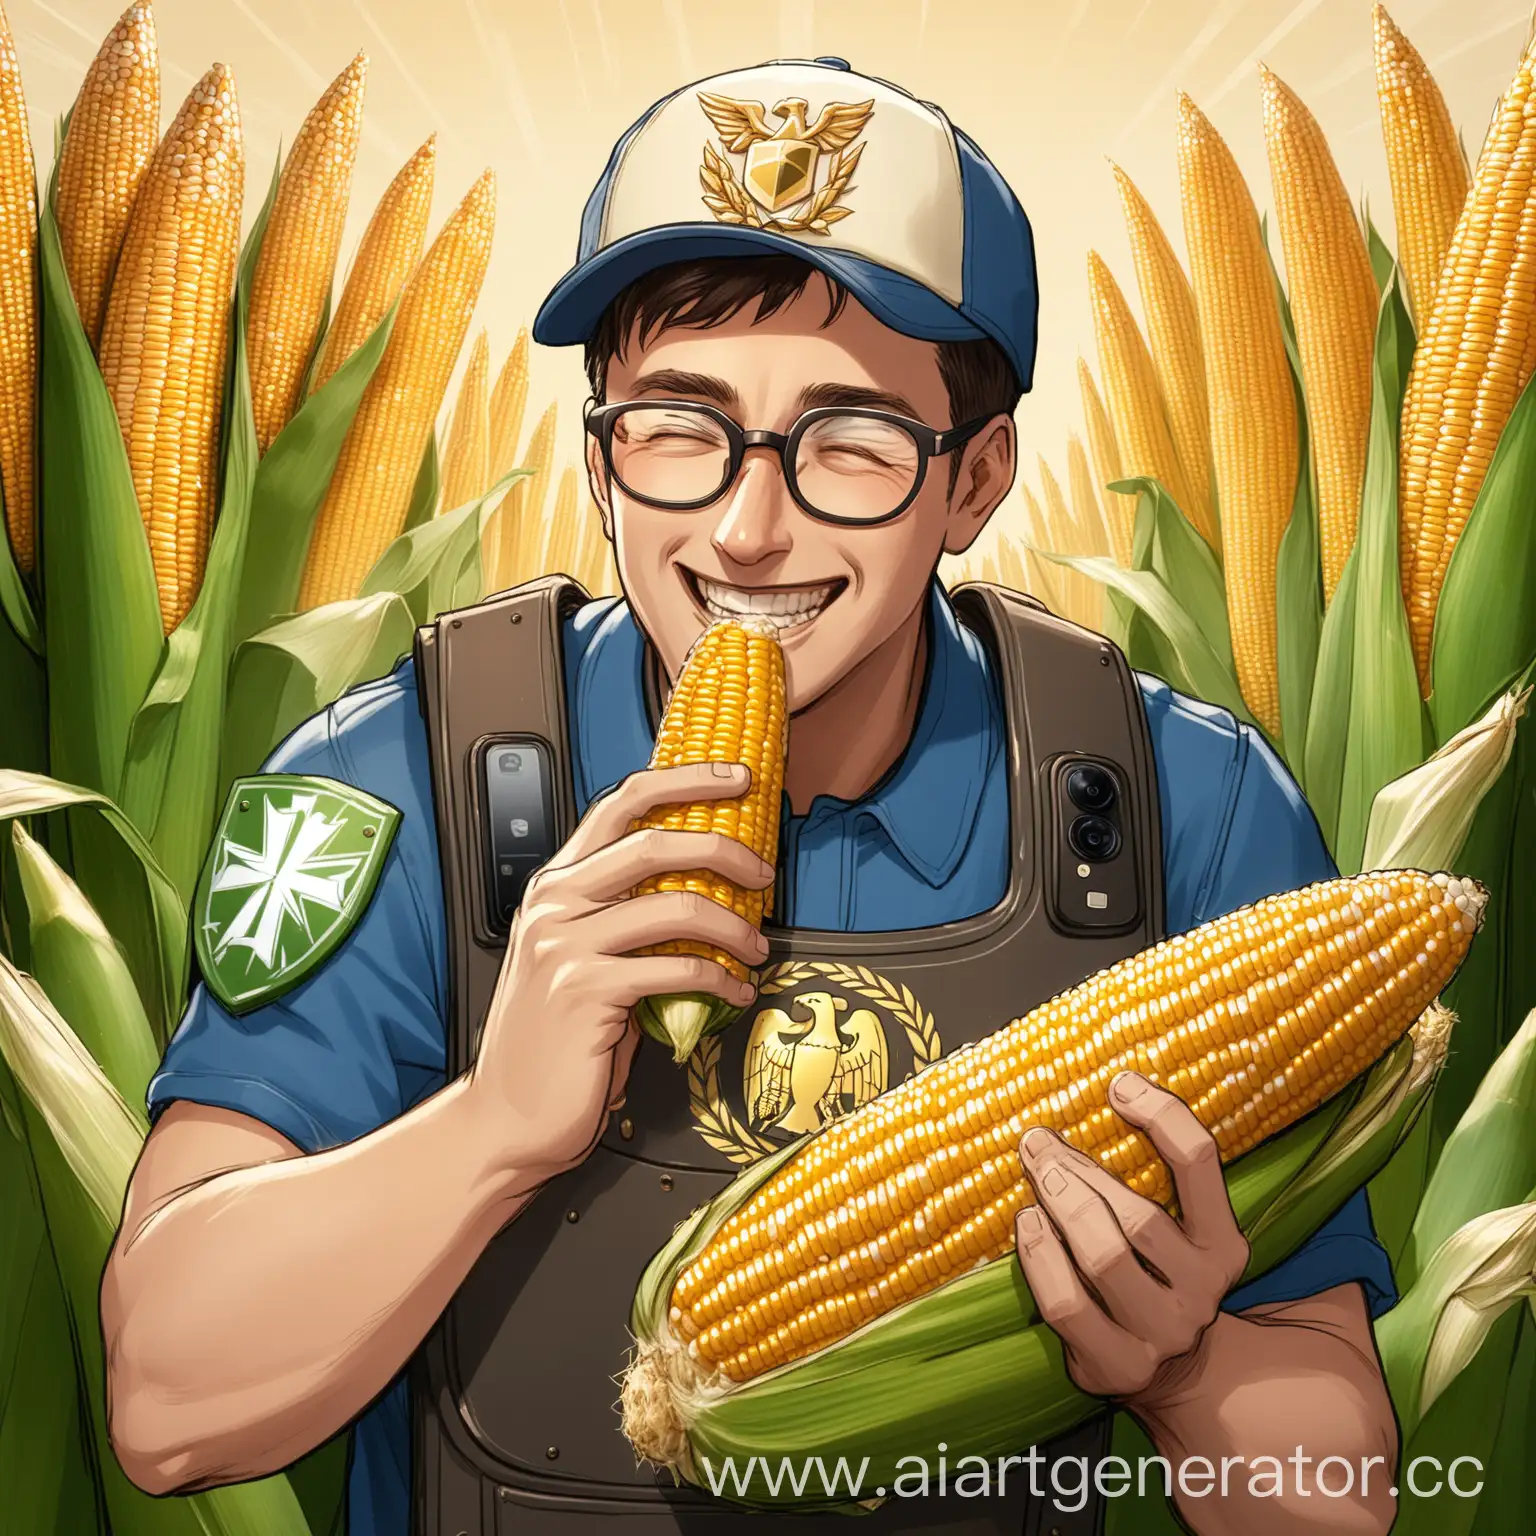 Happy-Man-in-Cap-Eating-Corn-and-Using-Smartphone-Outdoors